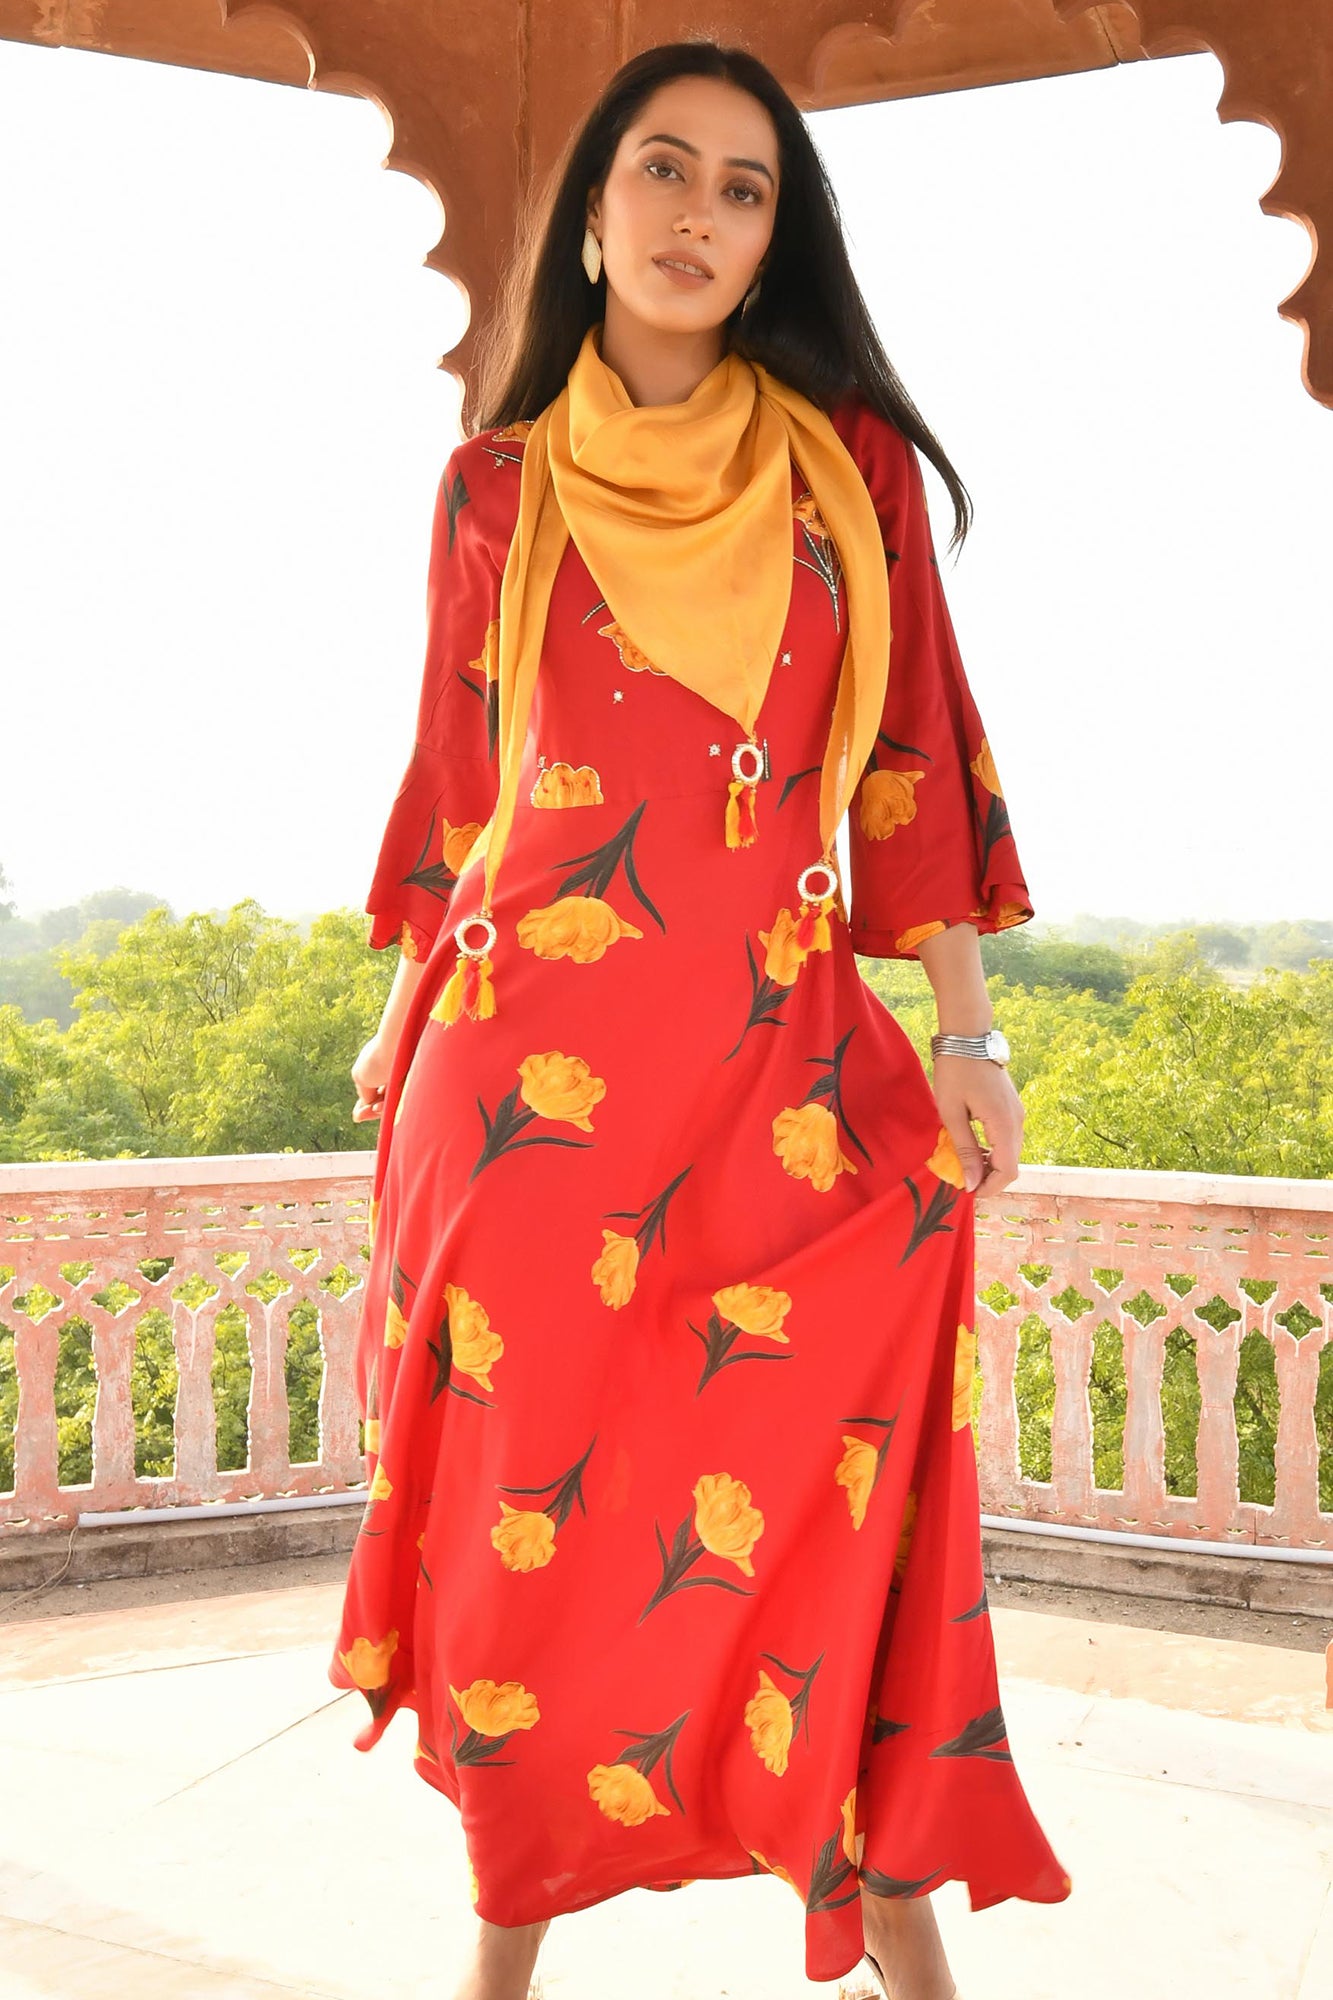 PRINTED RED RAYON LONG DRESS WITH YELLOW SCARF